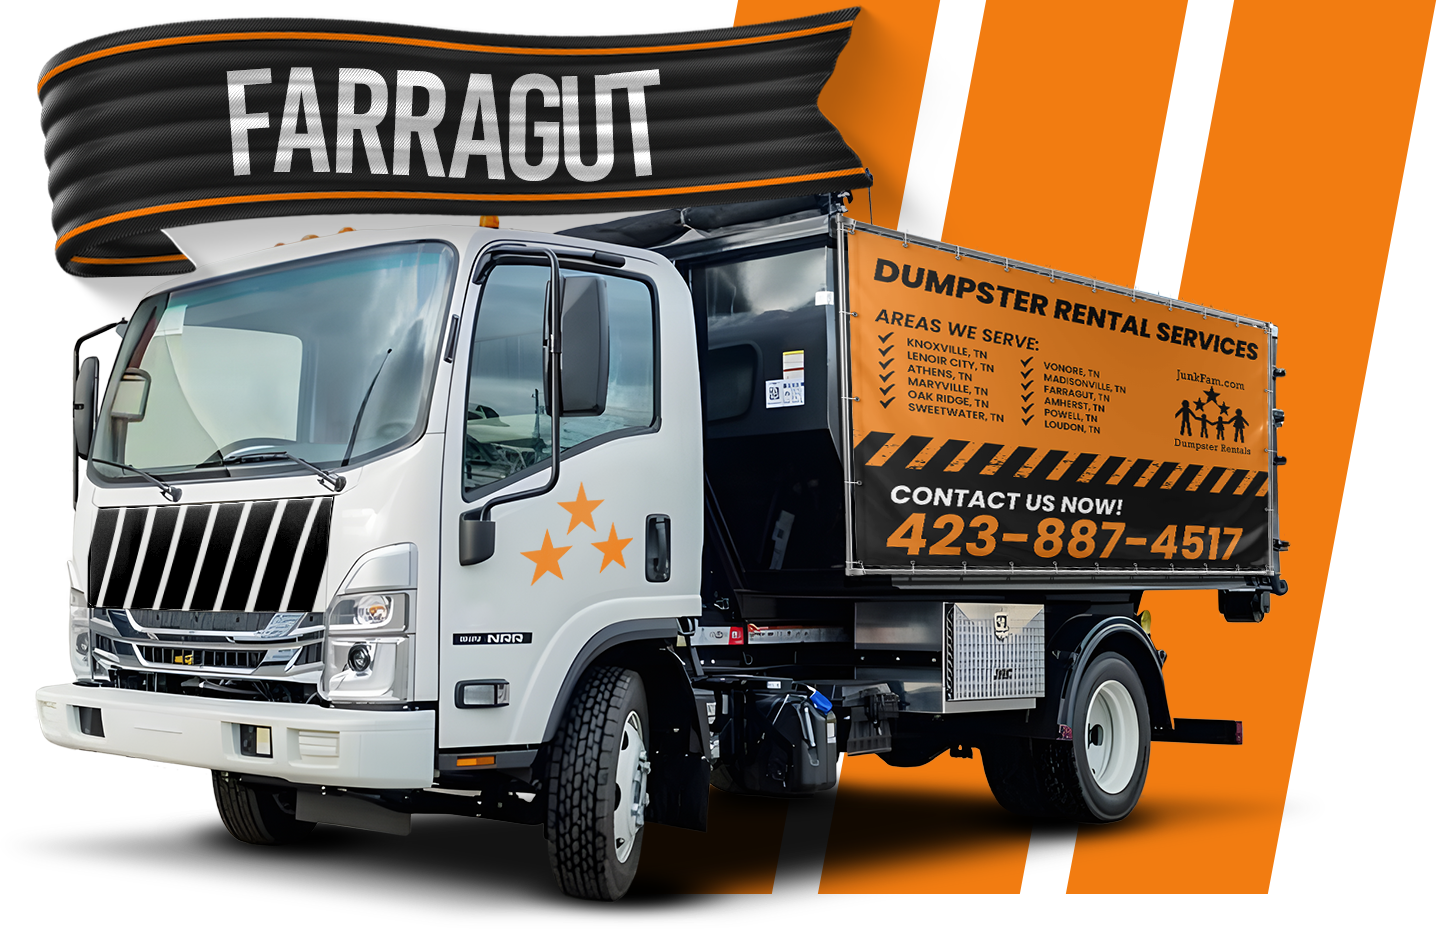 A garbage truck is parked in front of a sign that says Farragut.